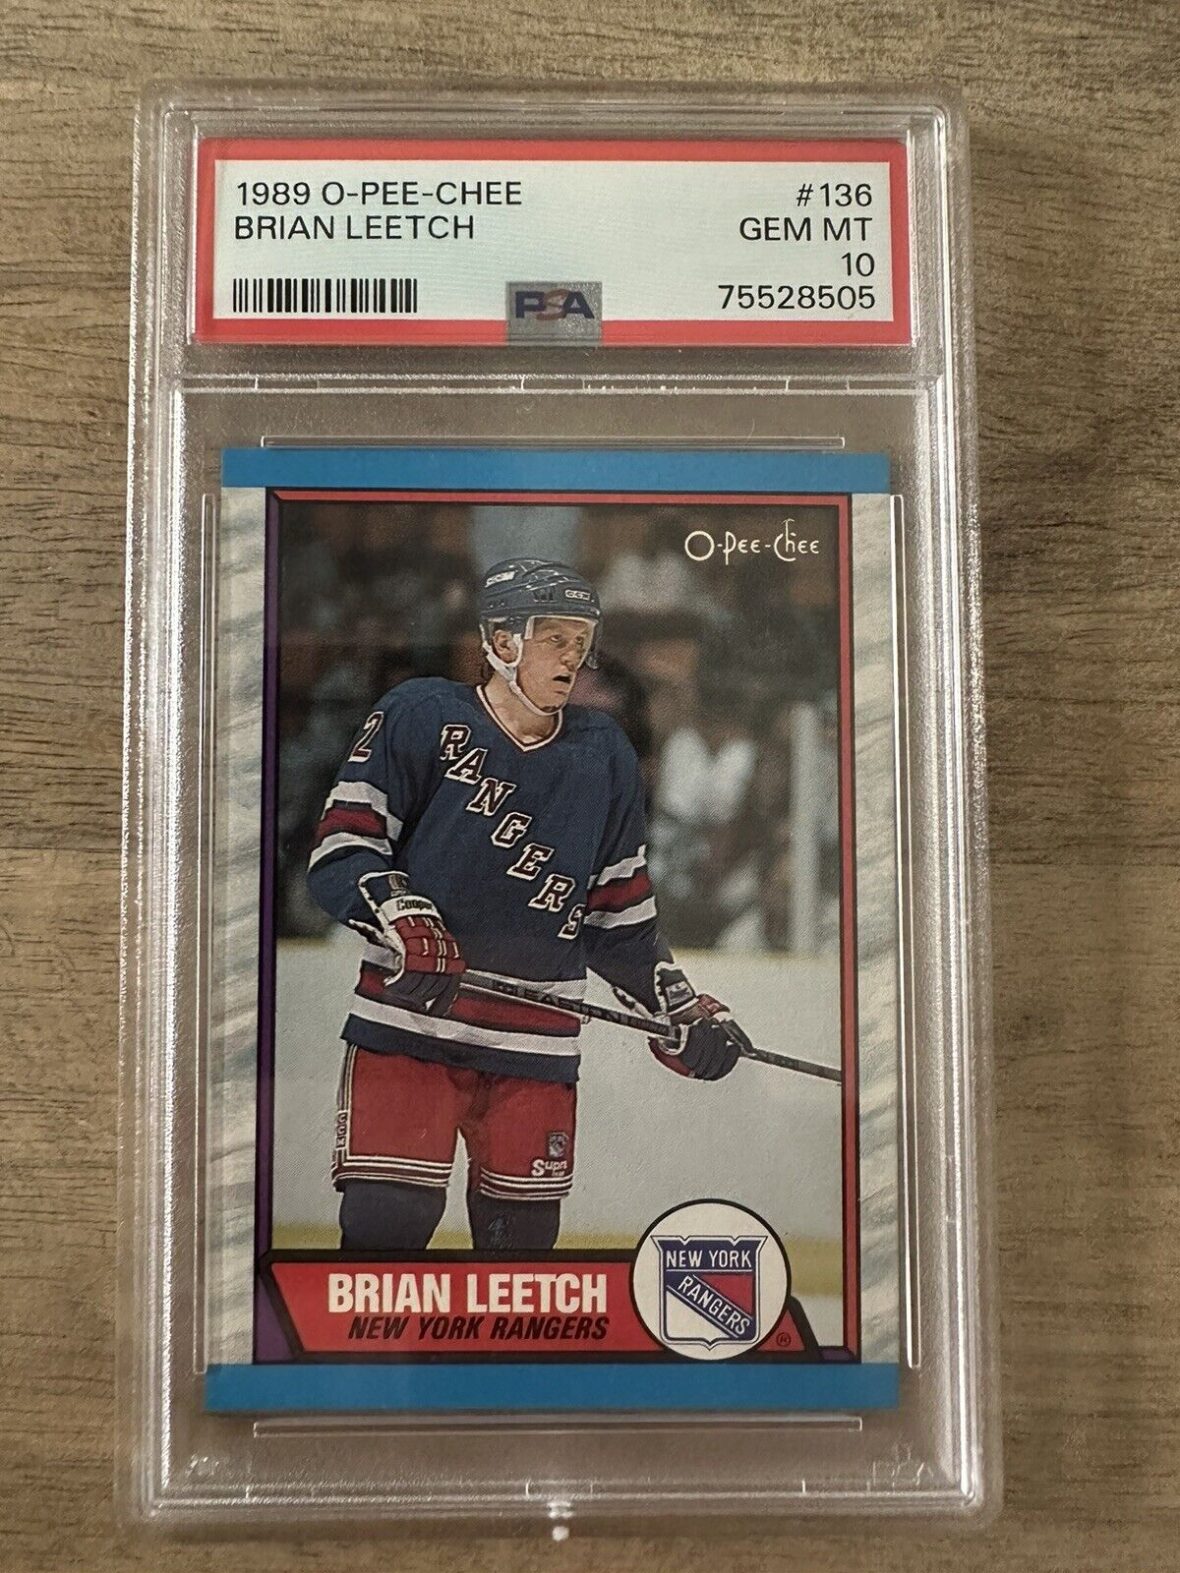 NHL Cards from the Junk Wax Era